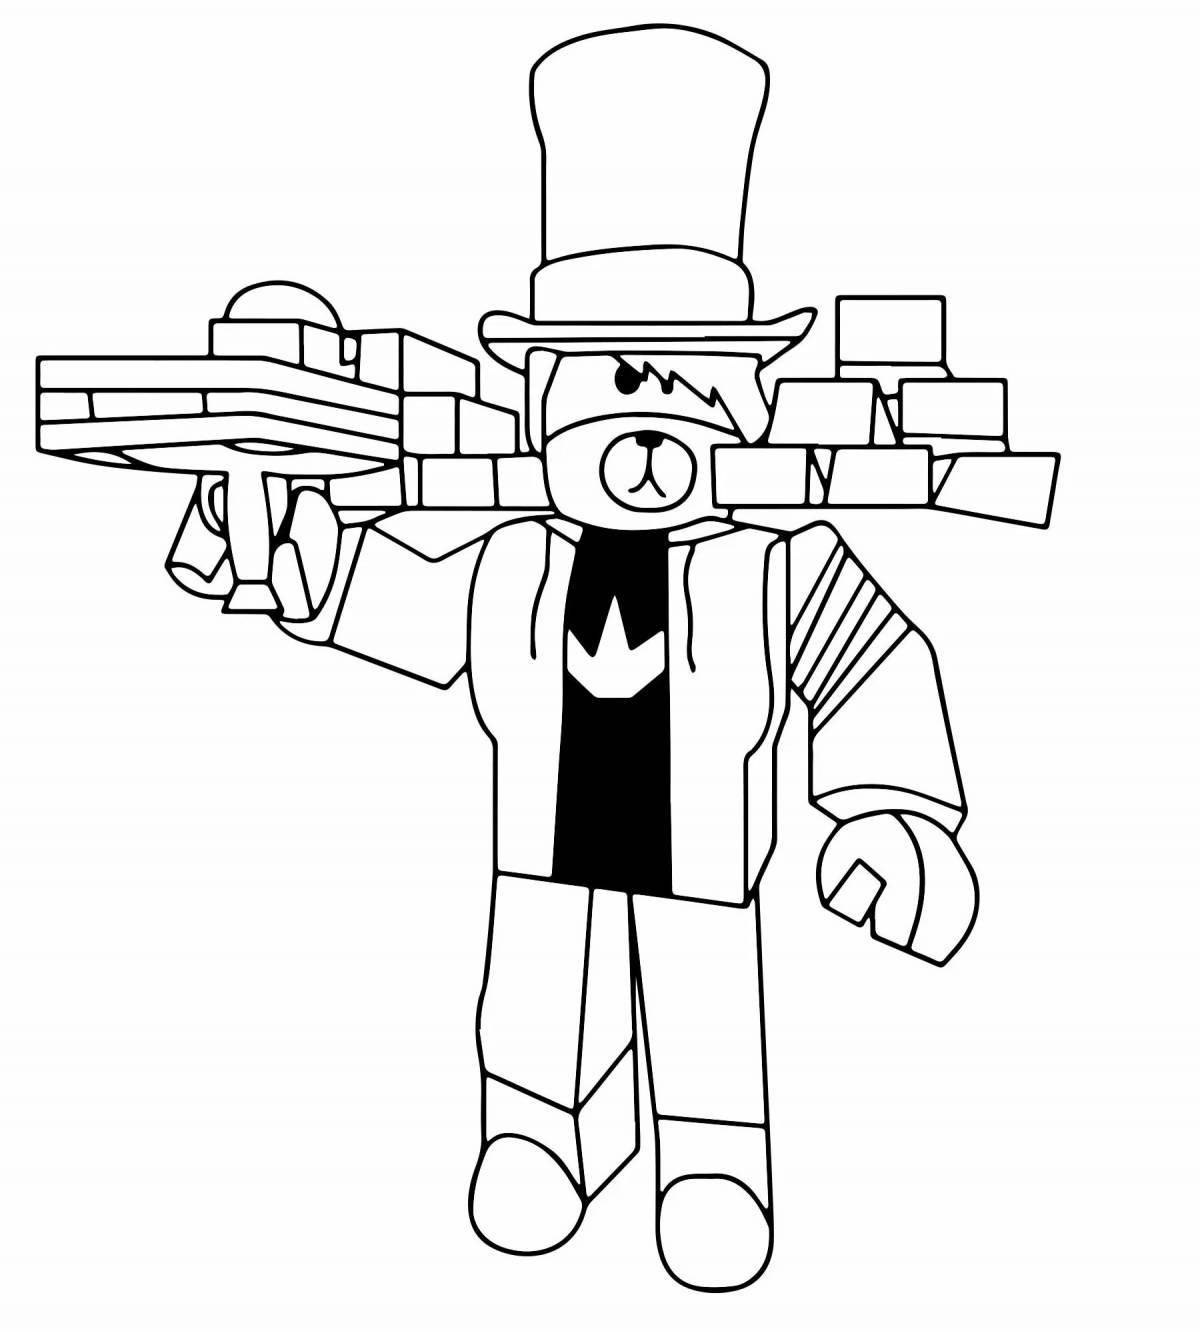 Playful roblox coloring page 3008